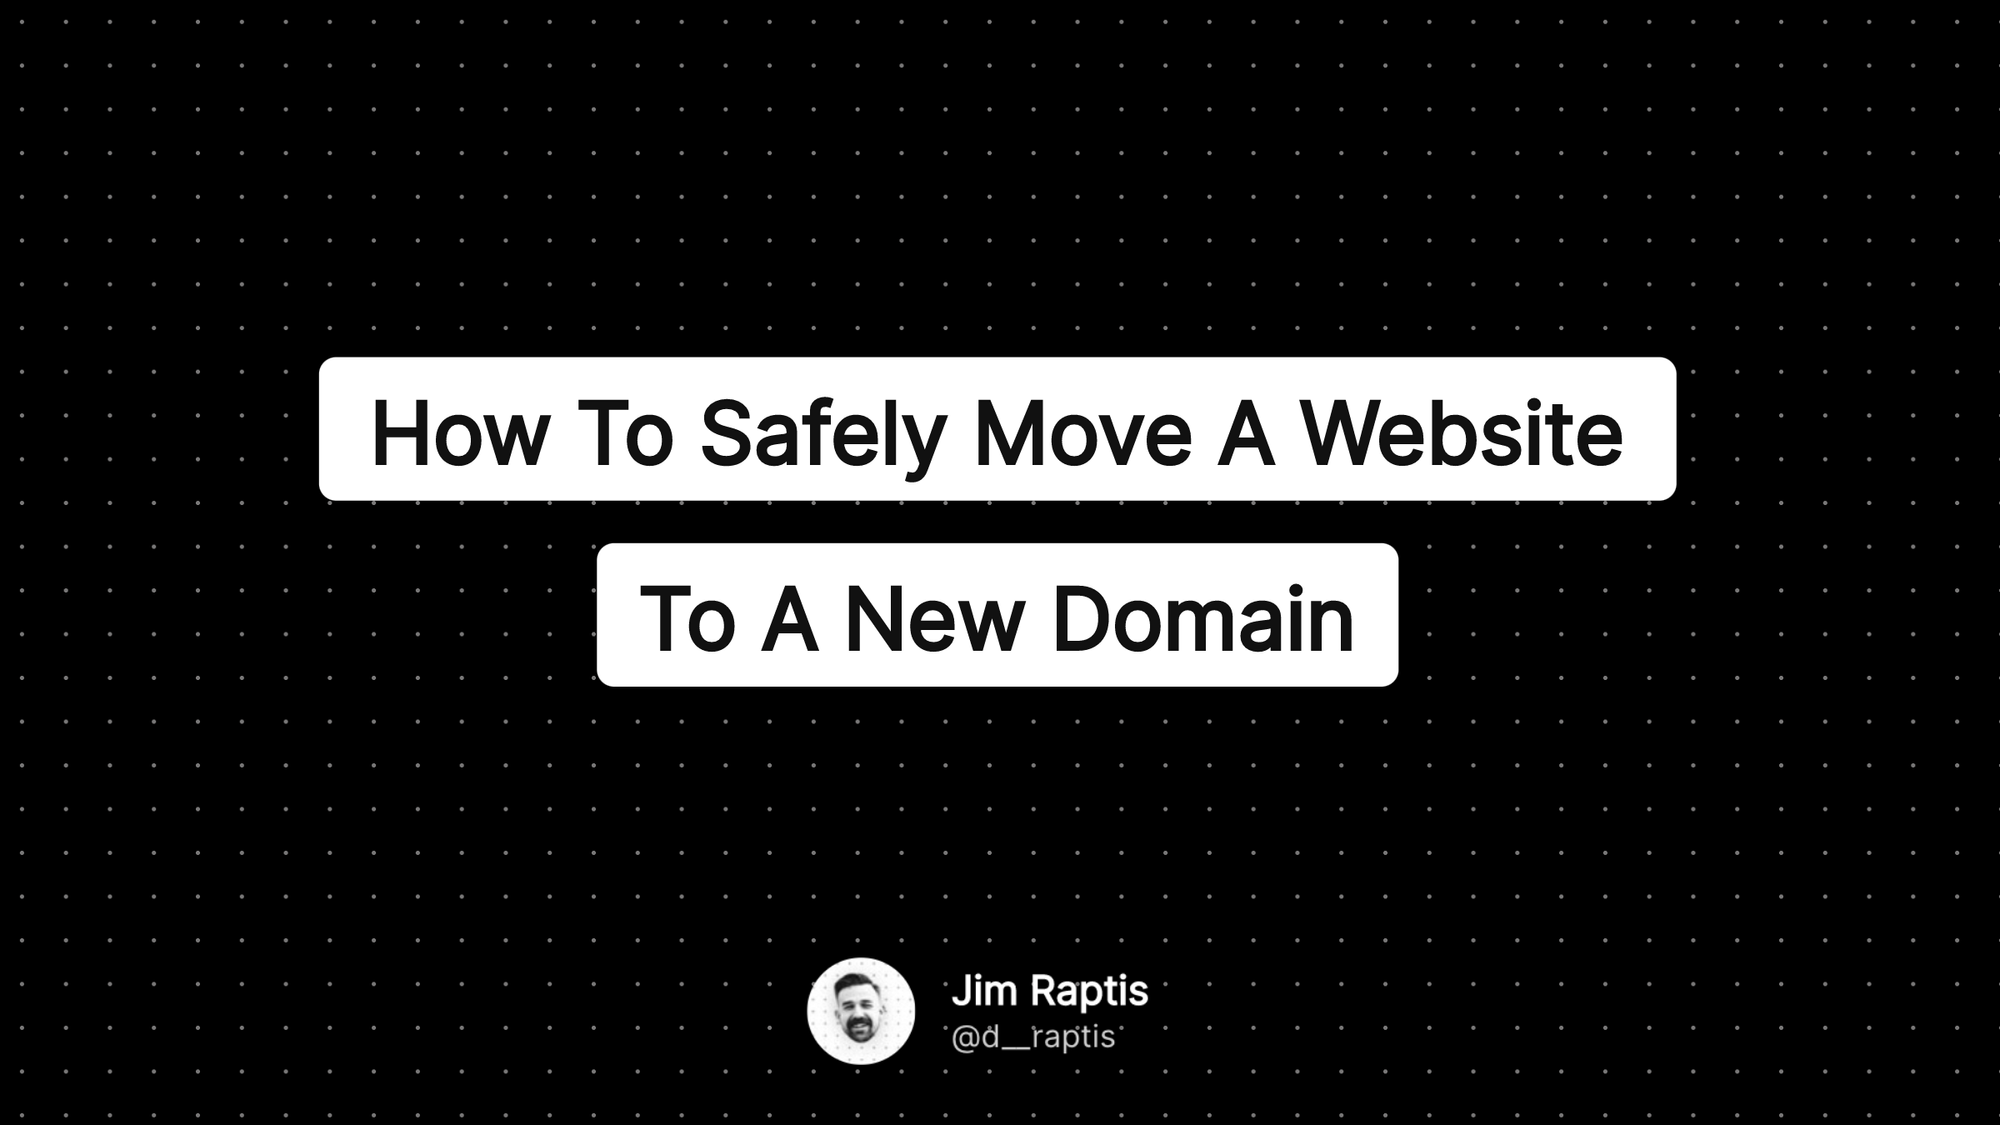 How to safely move a website to a new domain and keep SEO ranking